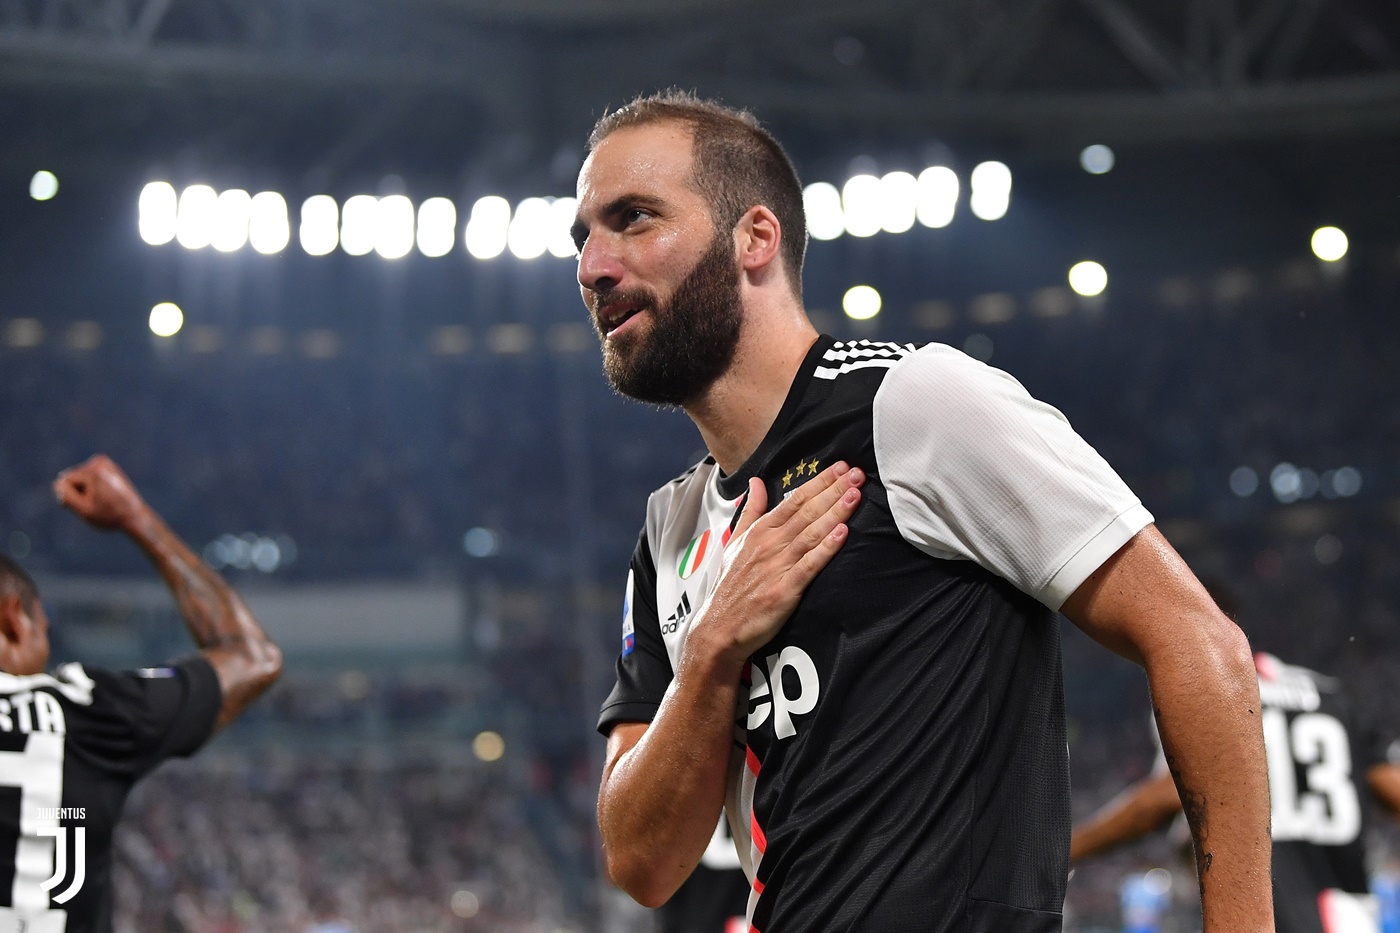 Why is Juventus considering ending the Higuain contract?